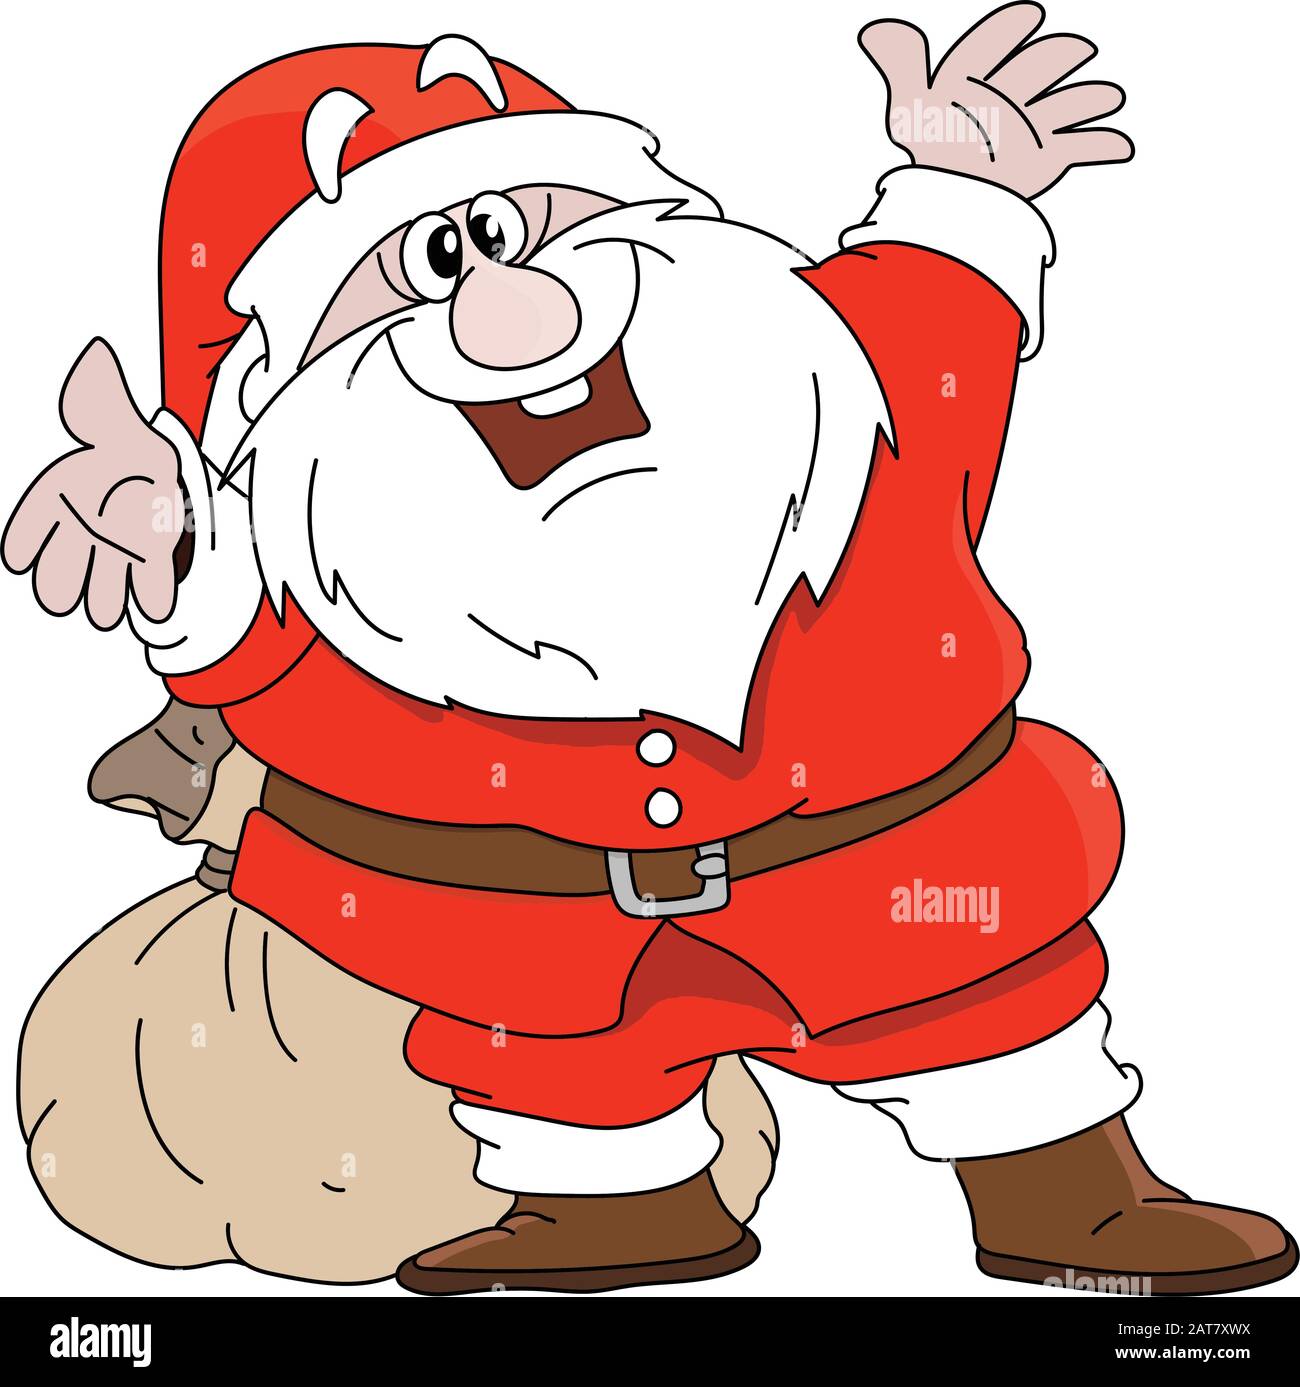 Cartoon Santa Claus welcoming new year with a bunch of presents in his sack vector illustration Stock Vector